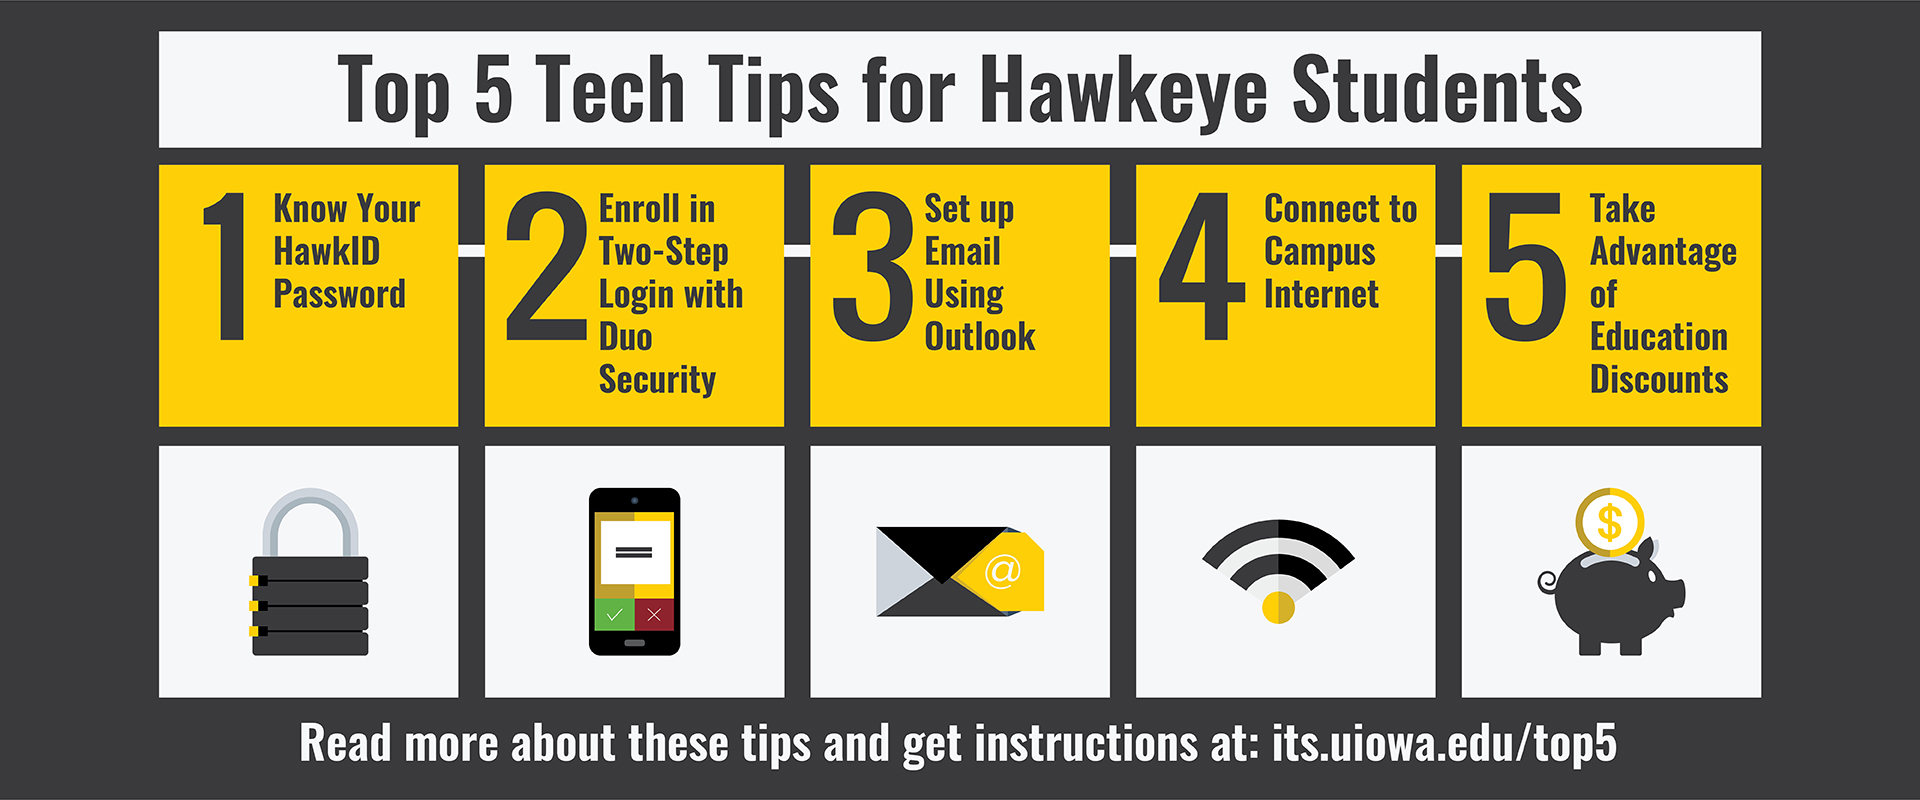 Top 5 Tech Tips for Hawkeye Students